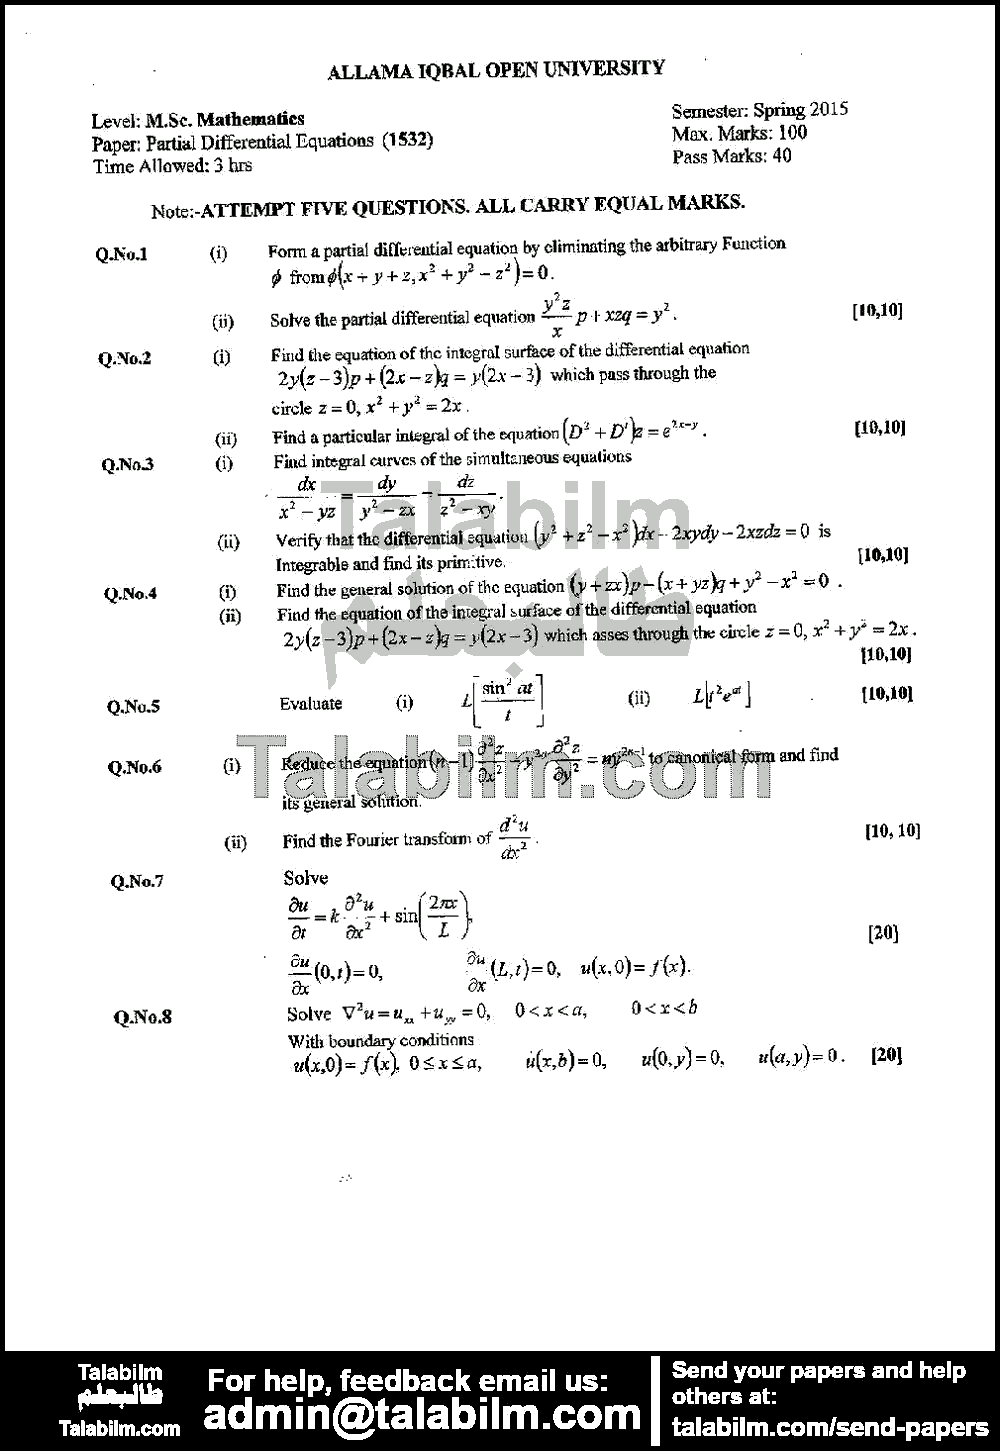 Partial Differential Equations 1532 past paper for Spring 2015